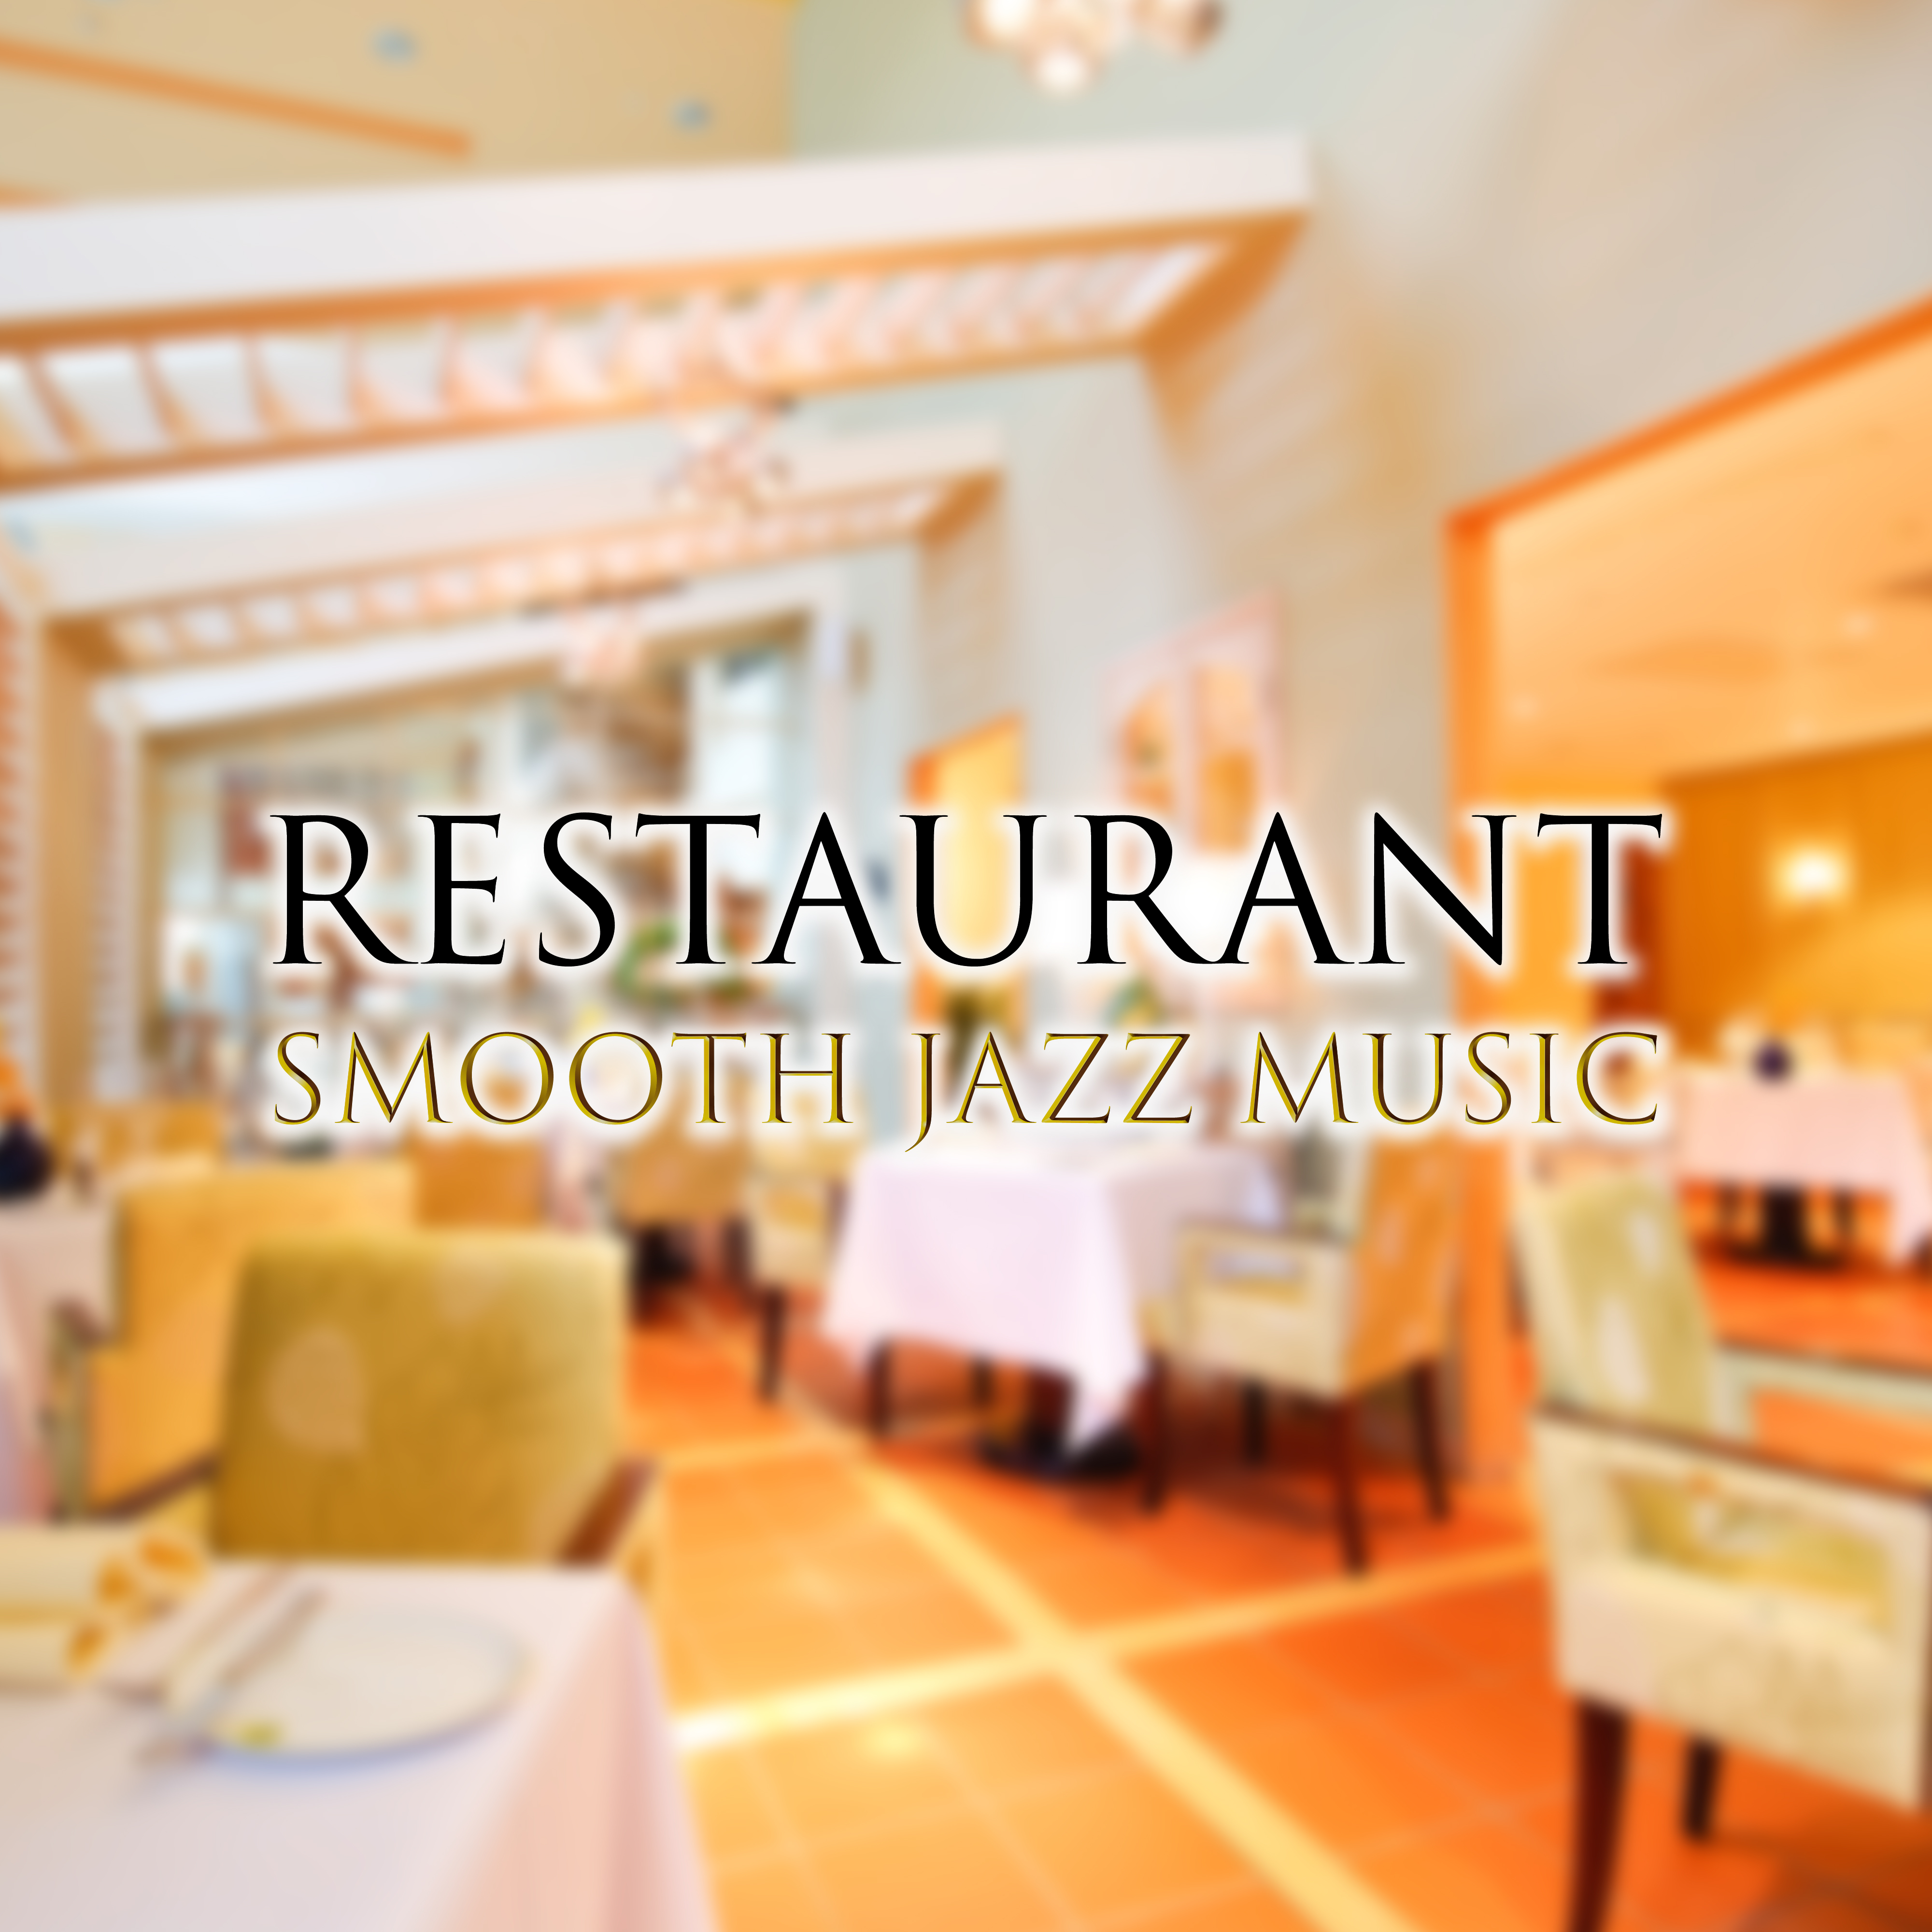 Restaurant Smooth Jazz Music – Calming Piano Jazz, Smooth Sounds, Mellow Music, Best Background Jazz, Easy Listening